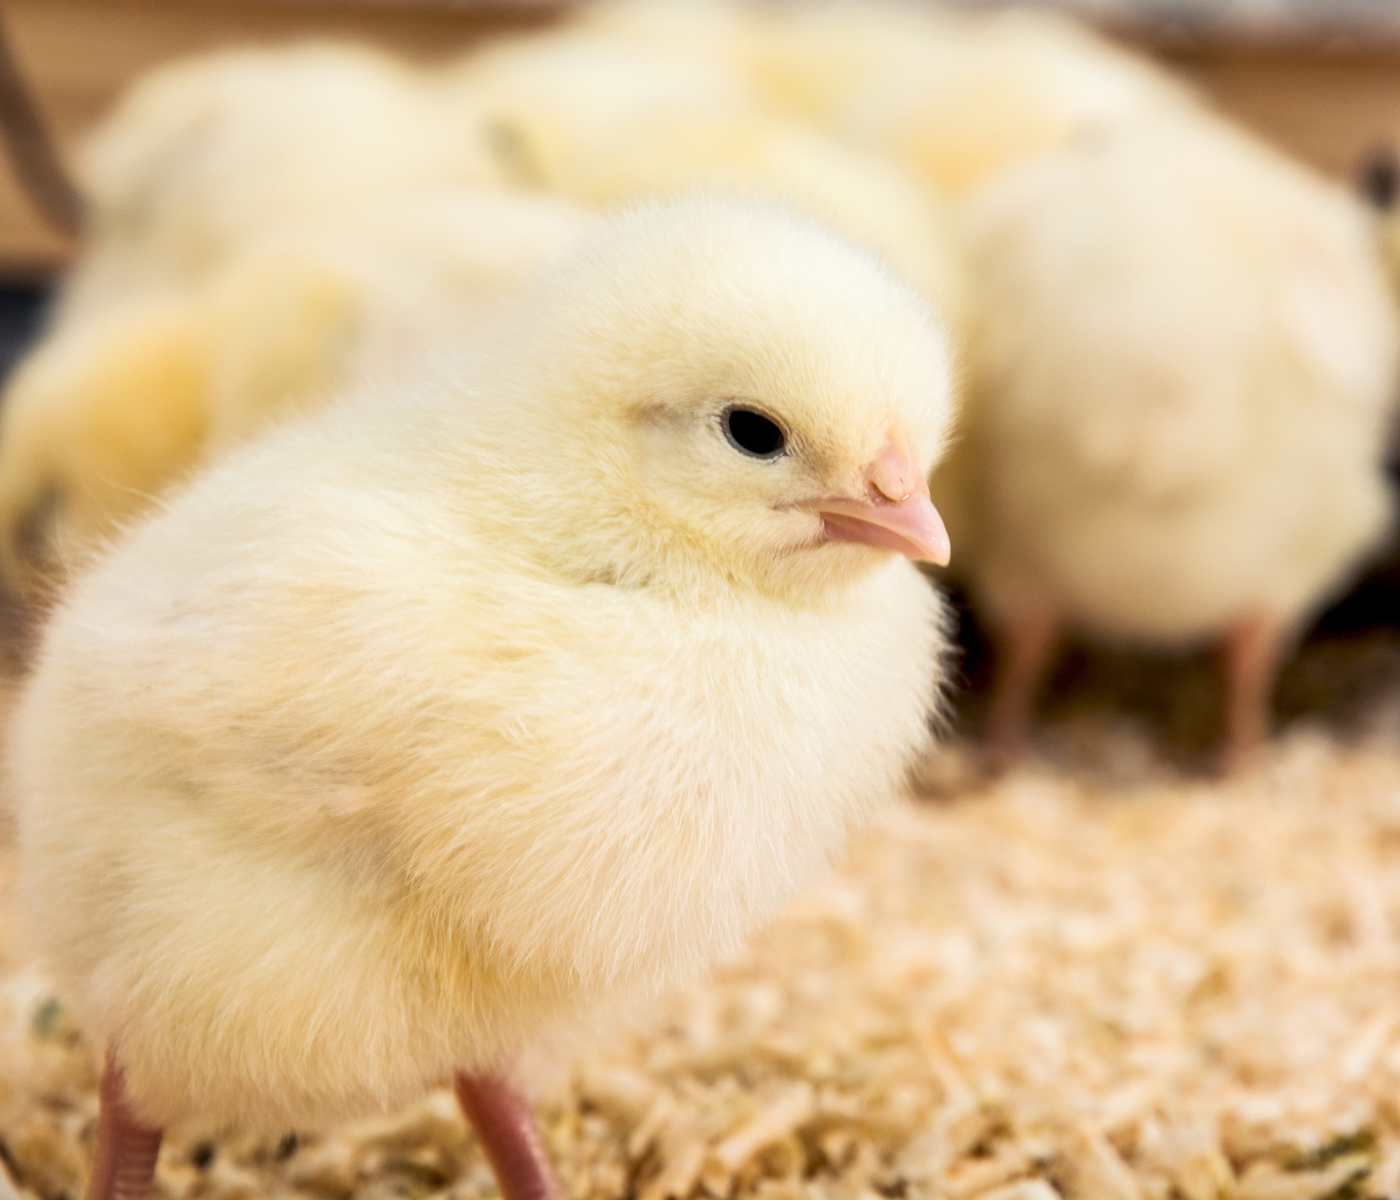 Latin American countries are the main importers of Brazilian poultry genetic material